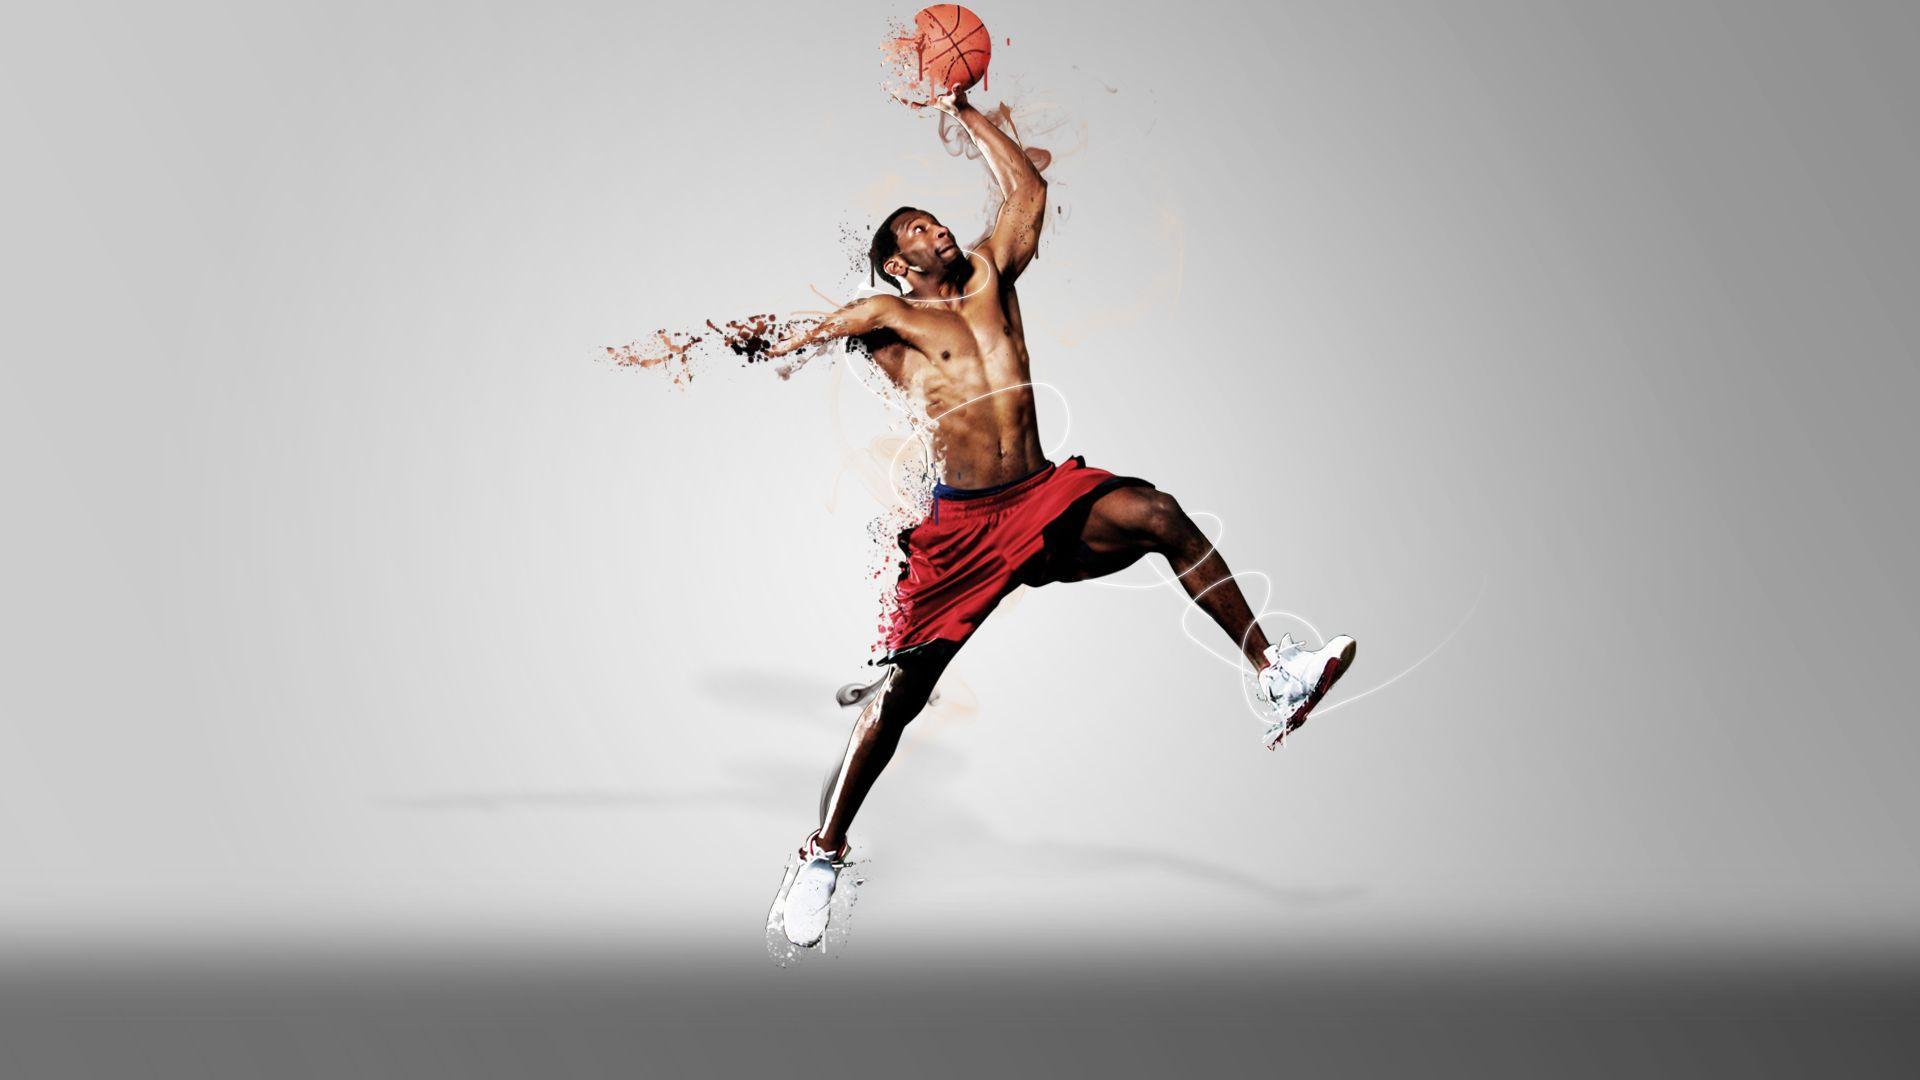 Sports Wallpapers - Wallpaper Cave